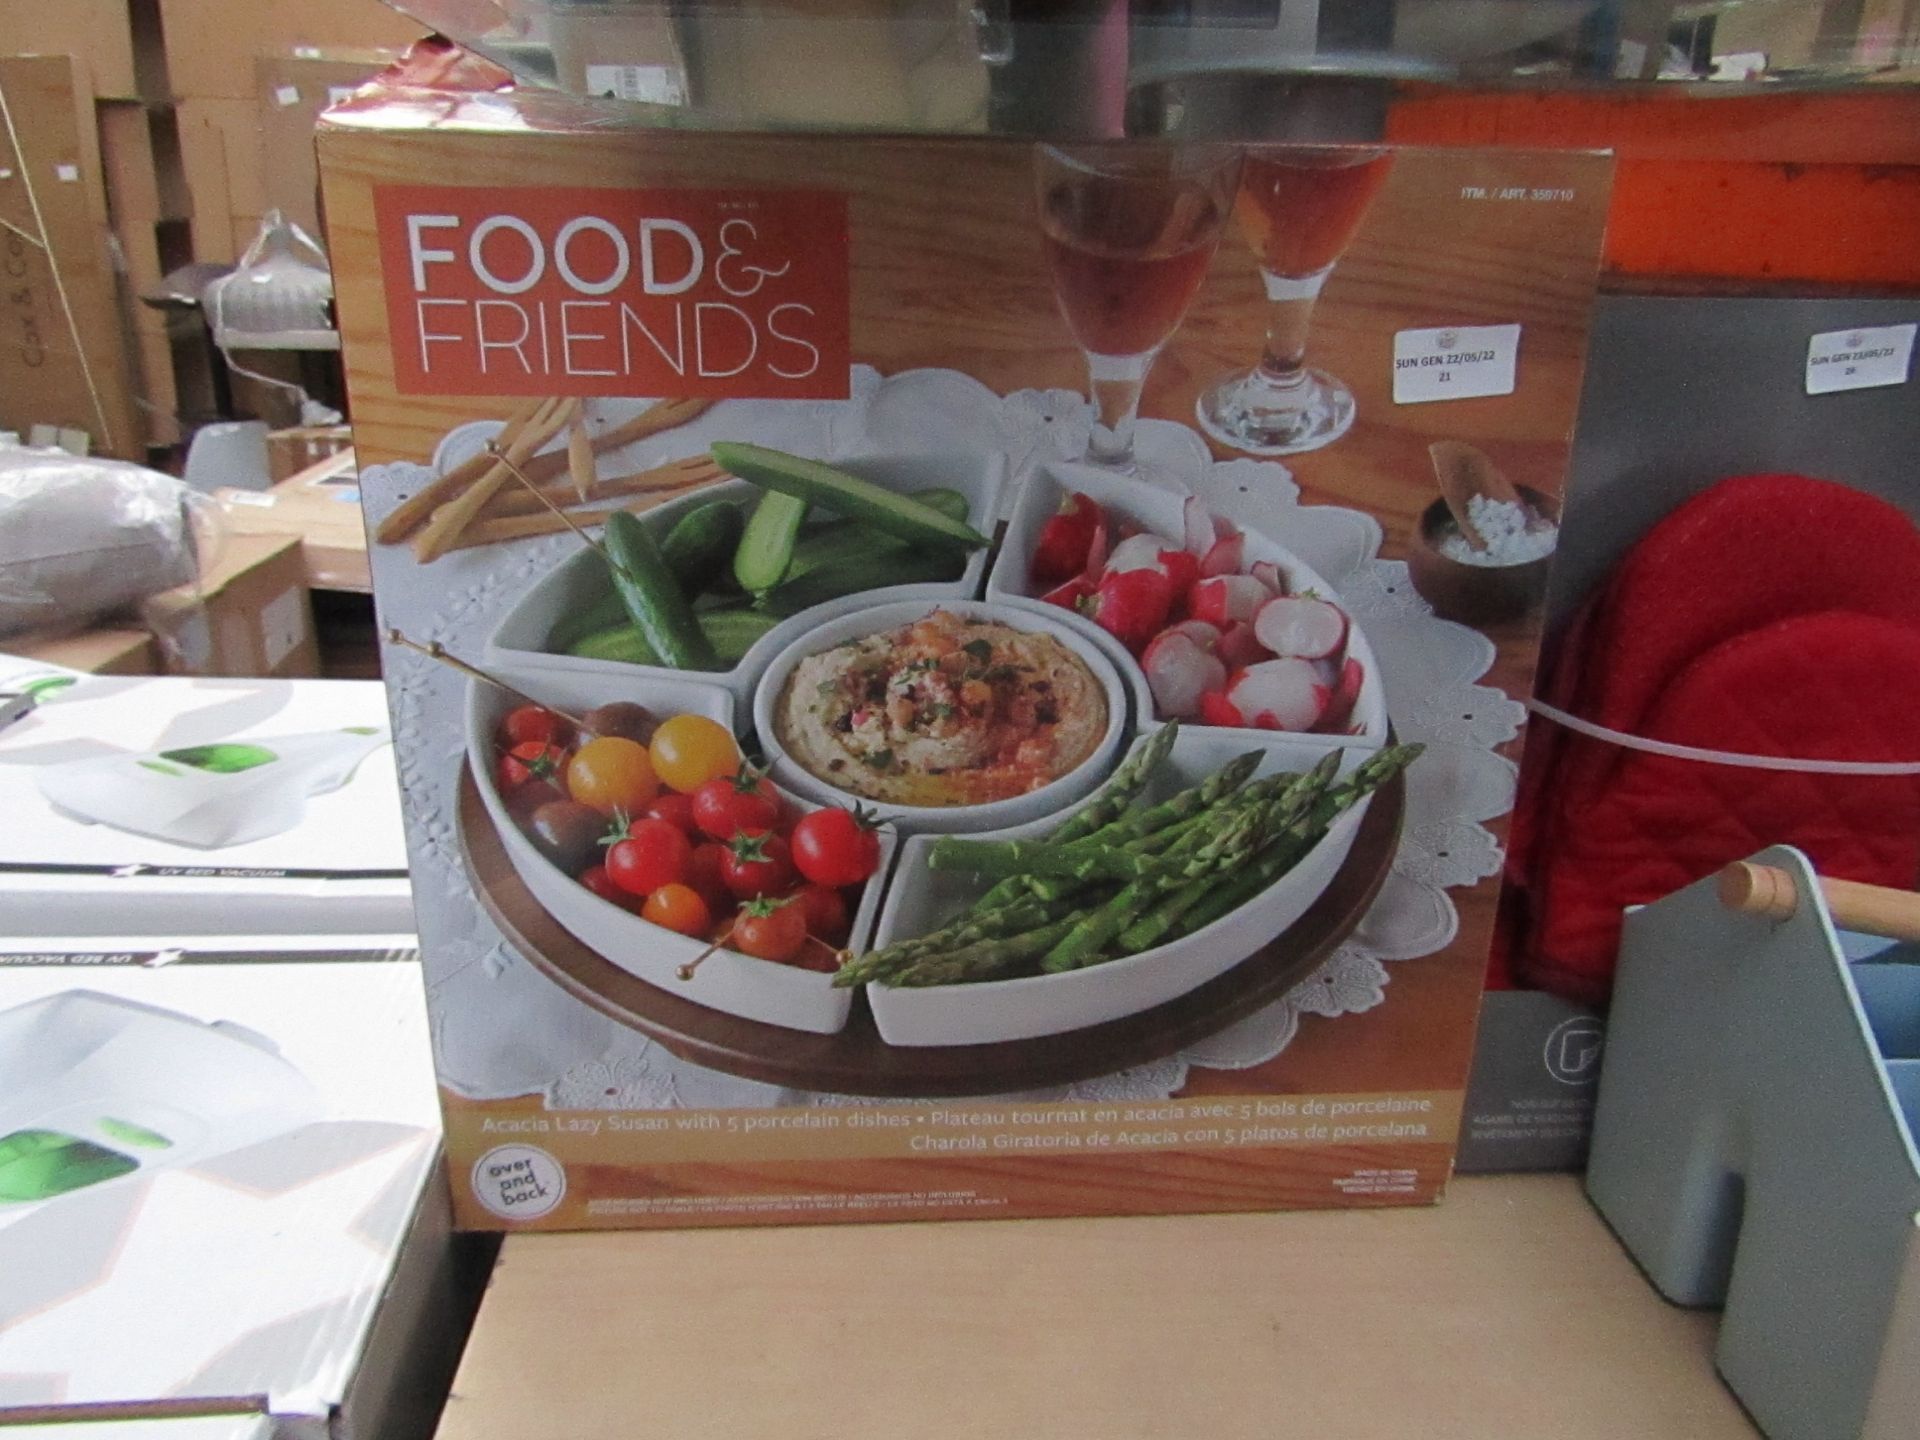 Food & Friends - Acacia Lazy Susan With 5 Porcelain Dishes - Unchecked & Boxed. RRP £27.99